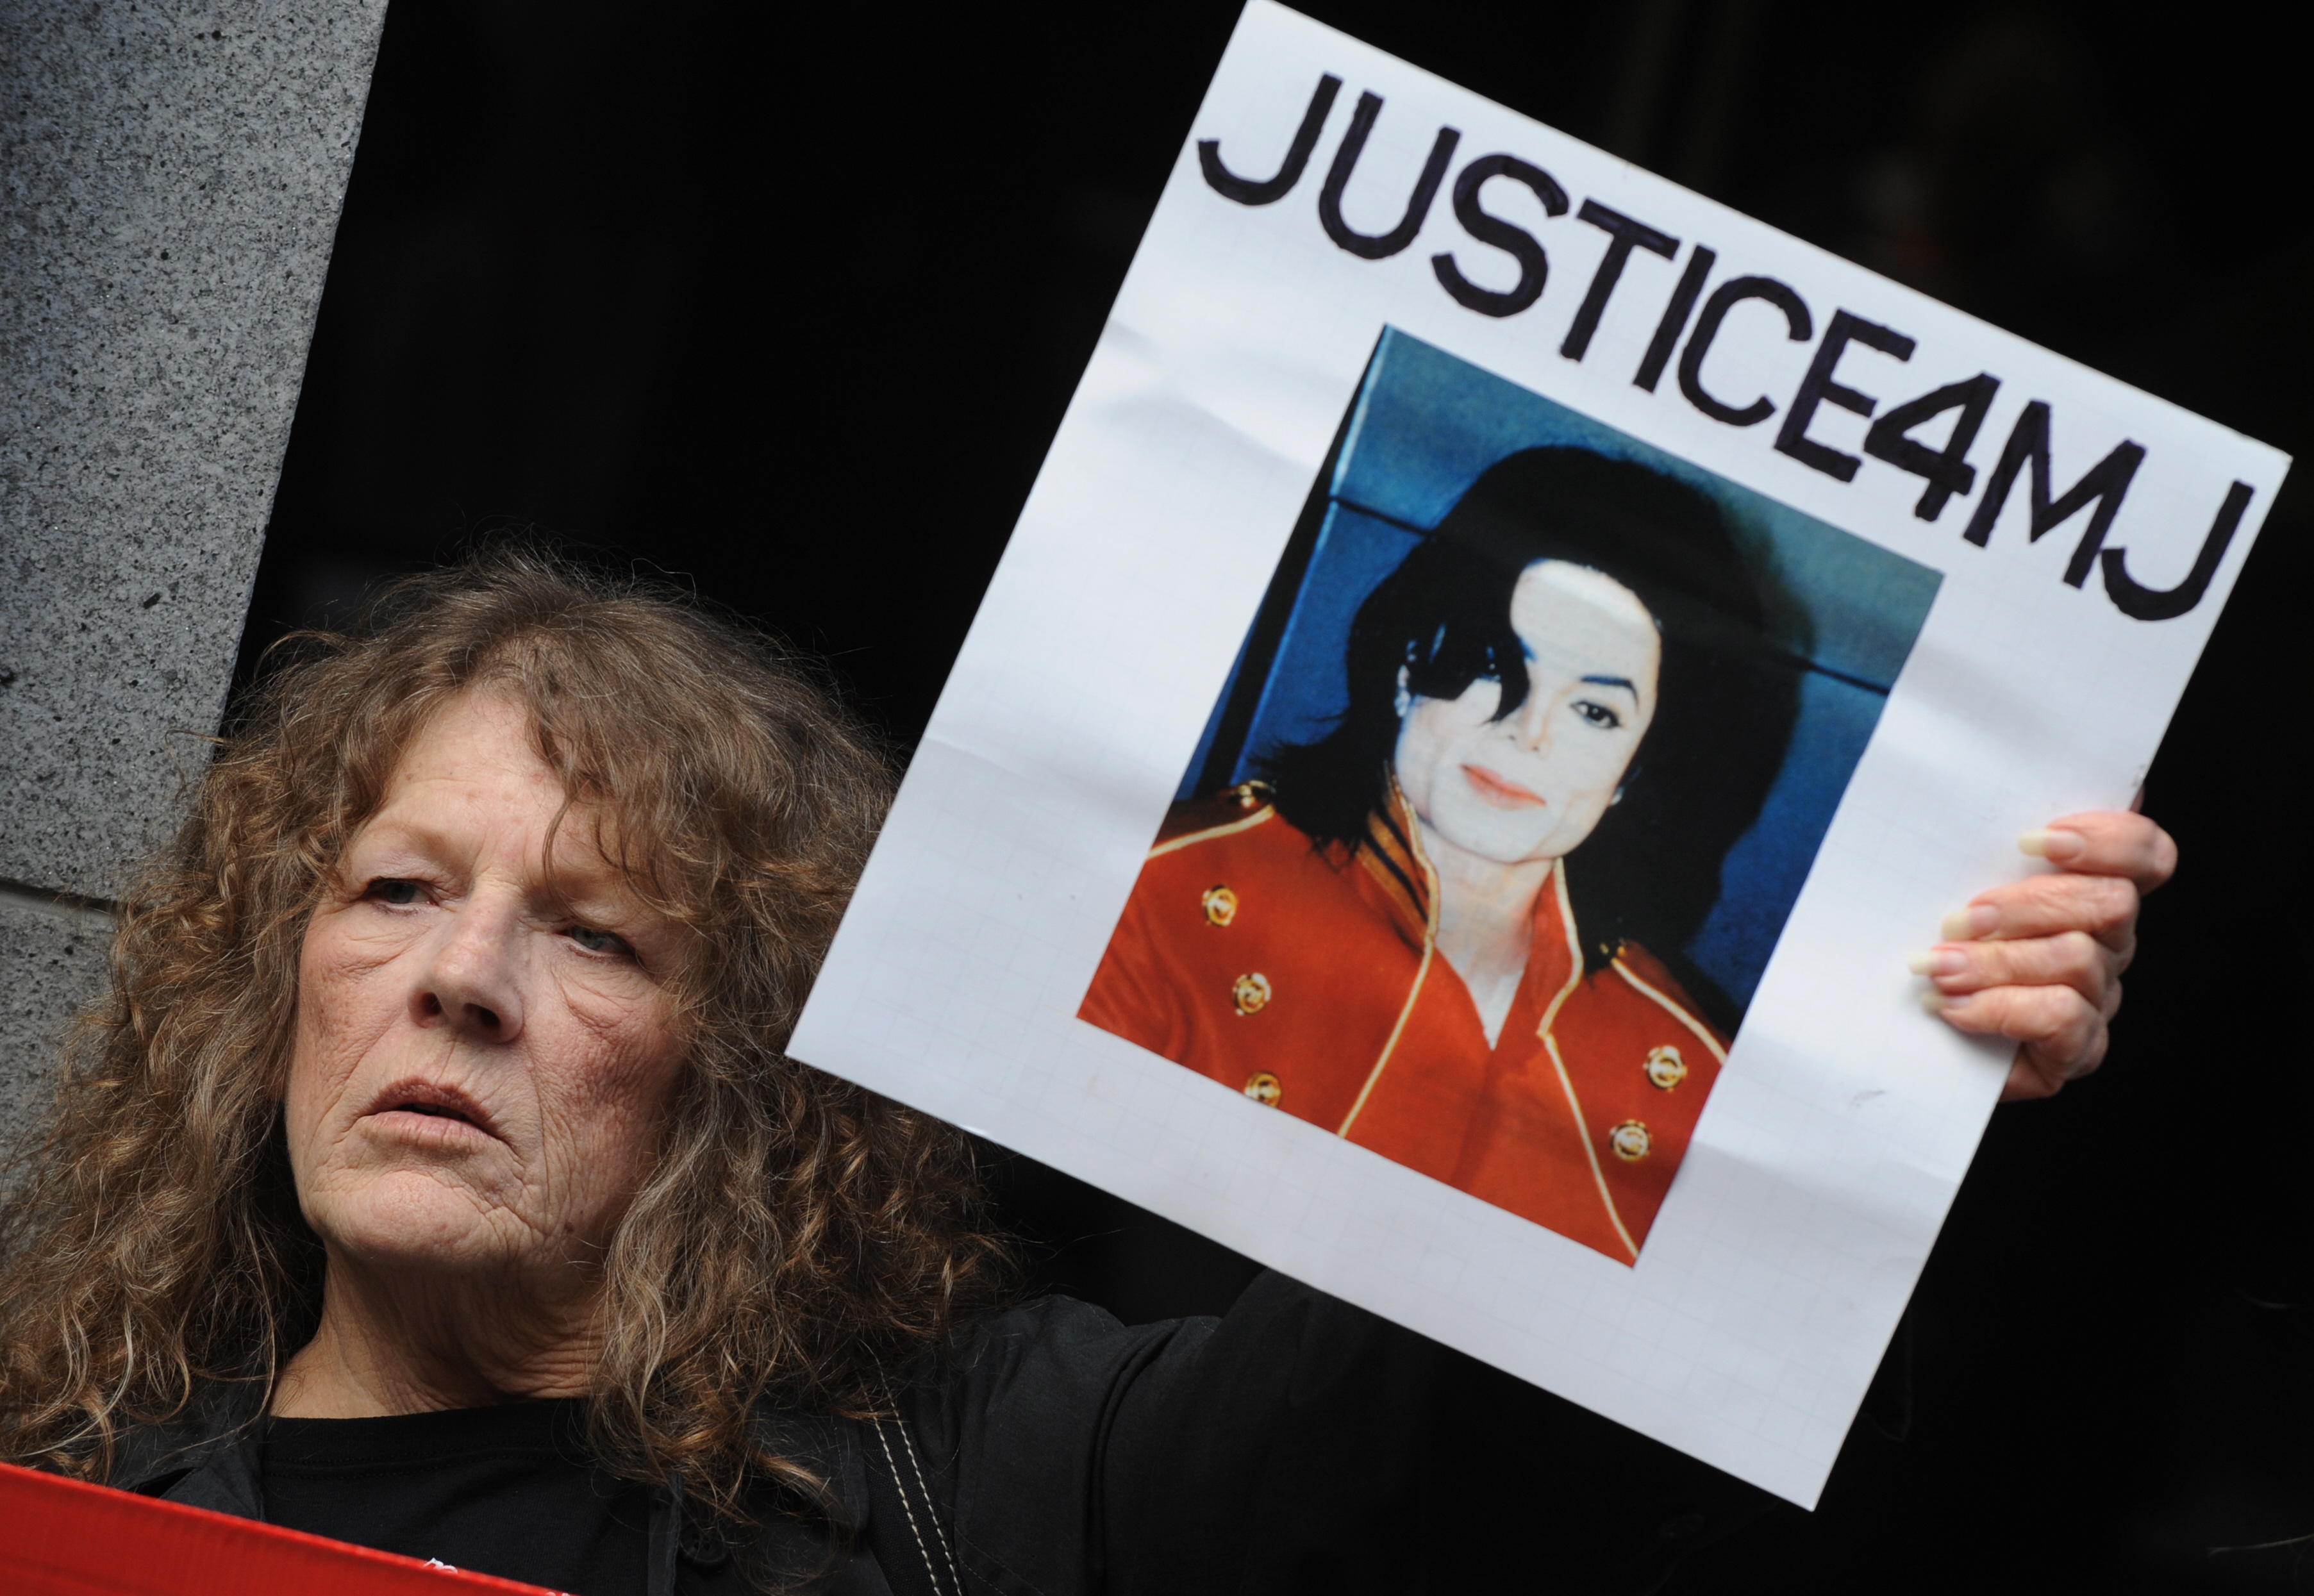 Michael Jackson fans call for justice outside the Los Angeles Superior Court before Doctor Conrad Murray's second court appearance on an involuntary manslaughter charge relating to the death of Michael Jackson in downtown Los Angeles on April 5, 2010. | Source: Getty Images